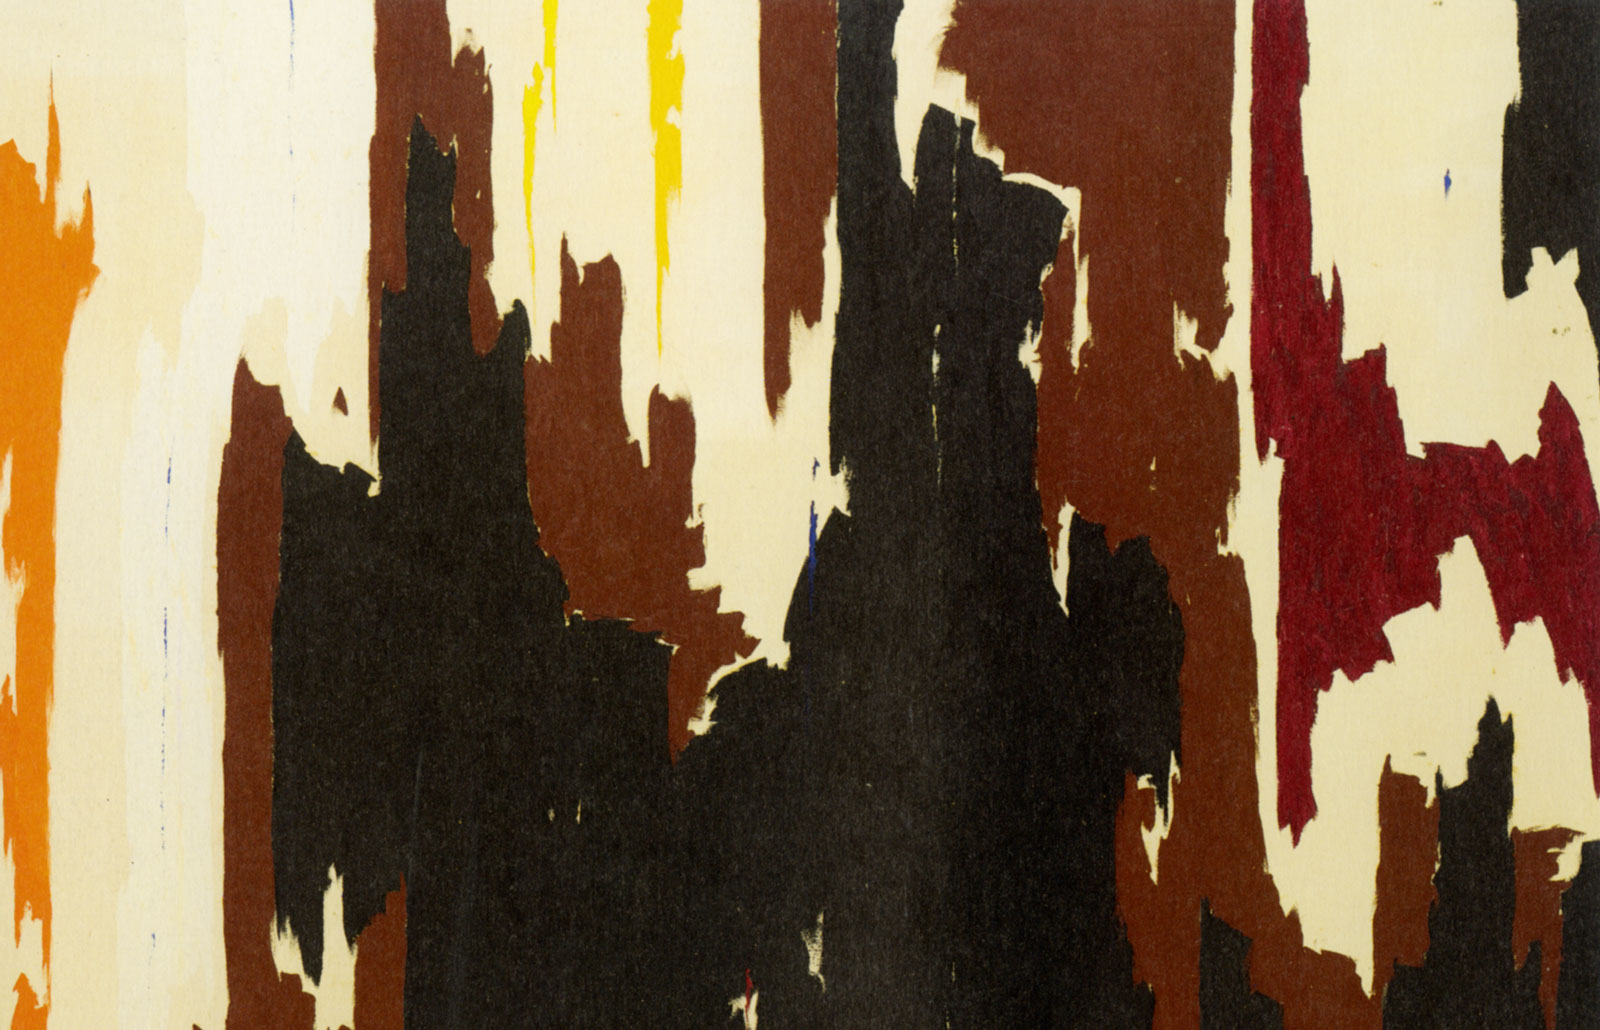 Clyfford Still: PH-150 (detail), 1958; click image to enlarge